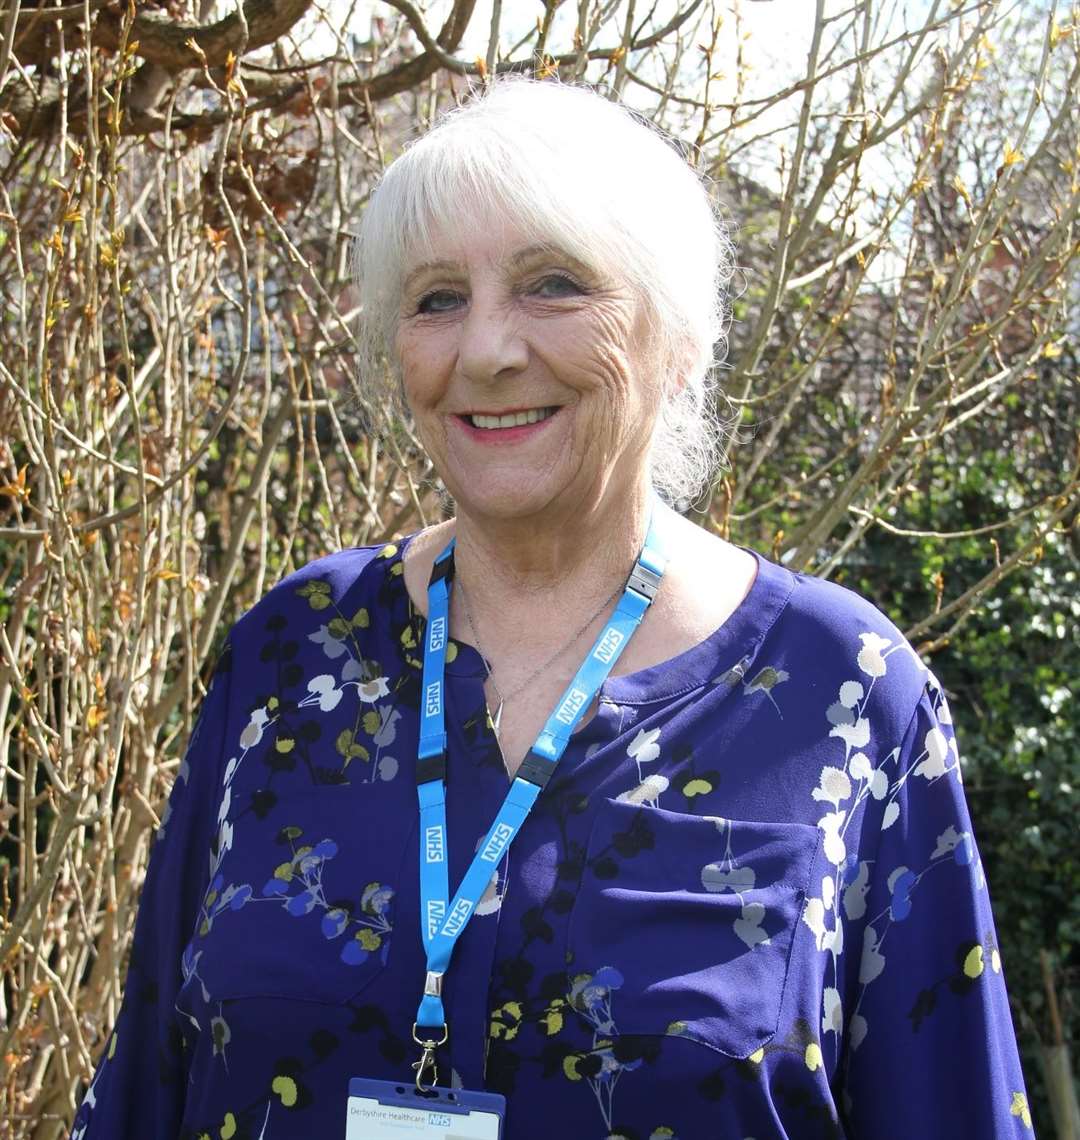 Tributes have been paid to Ann Shepherd, an ‘honest and compassionate’ NHS mental health counsellor who died after contracting Covid-19 (PA)